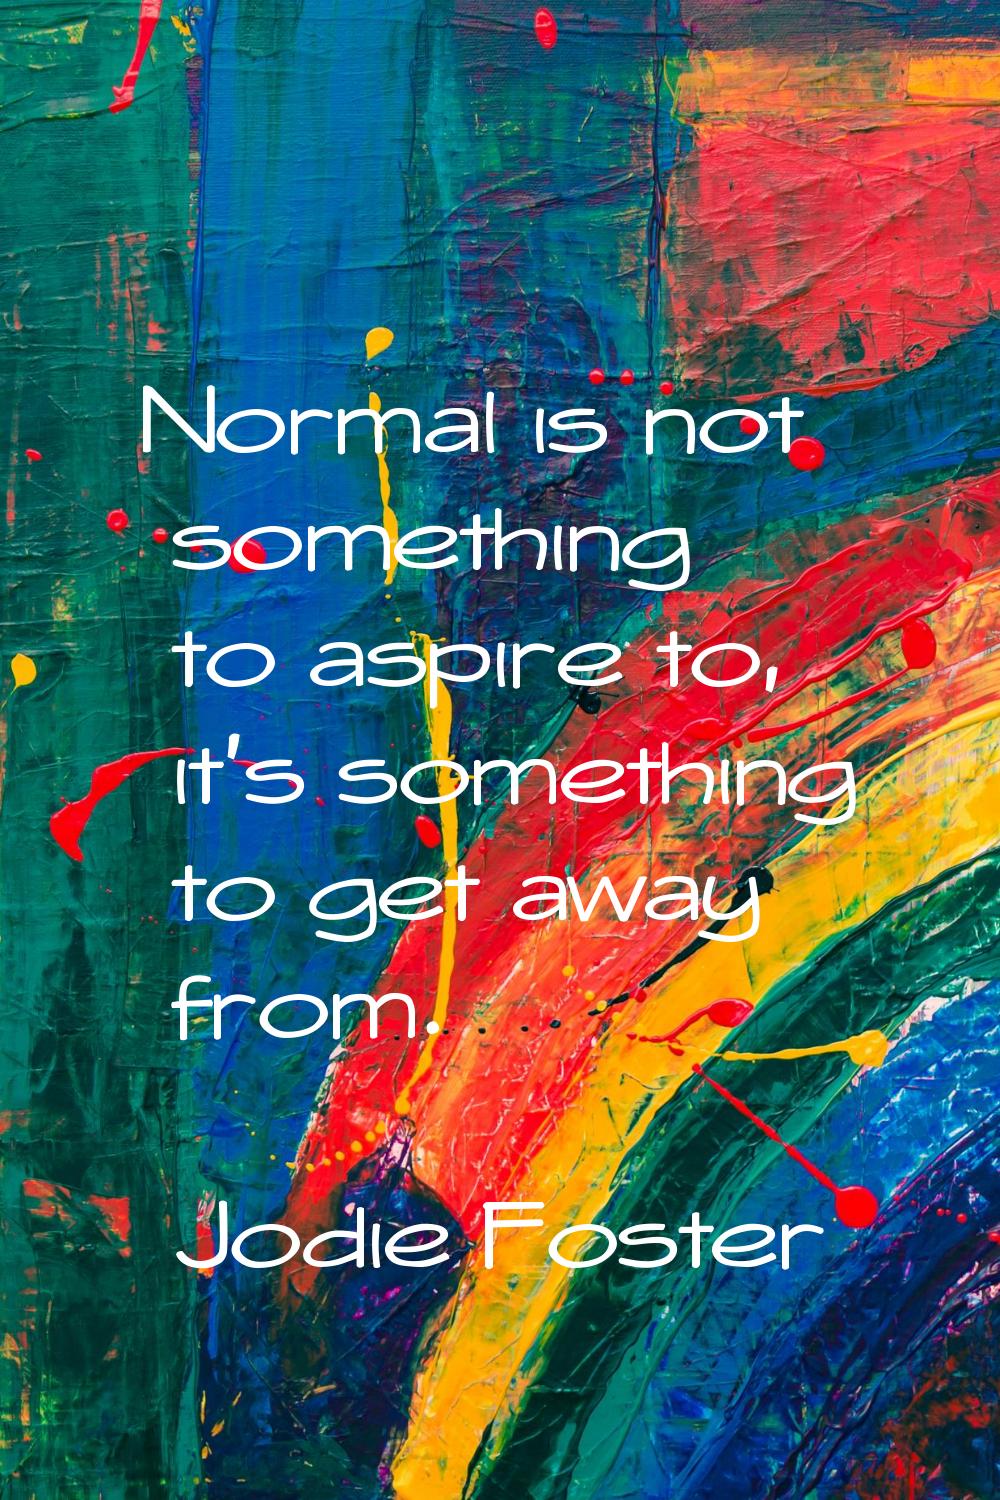 Normal is not something to aspire to, it's something to get away from.